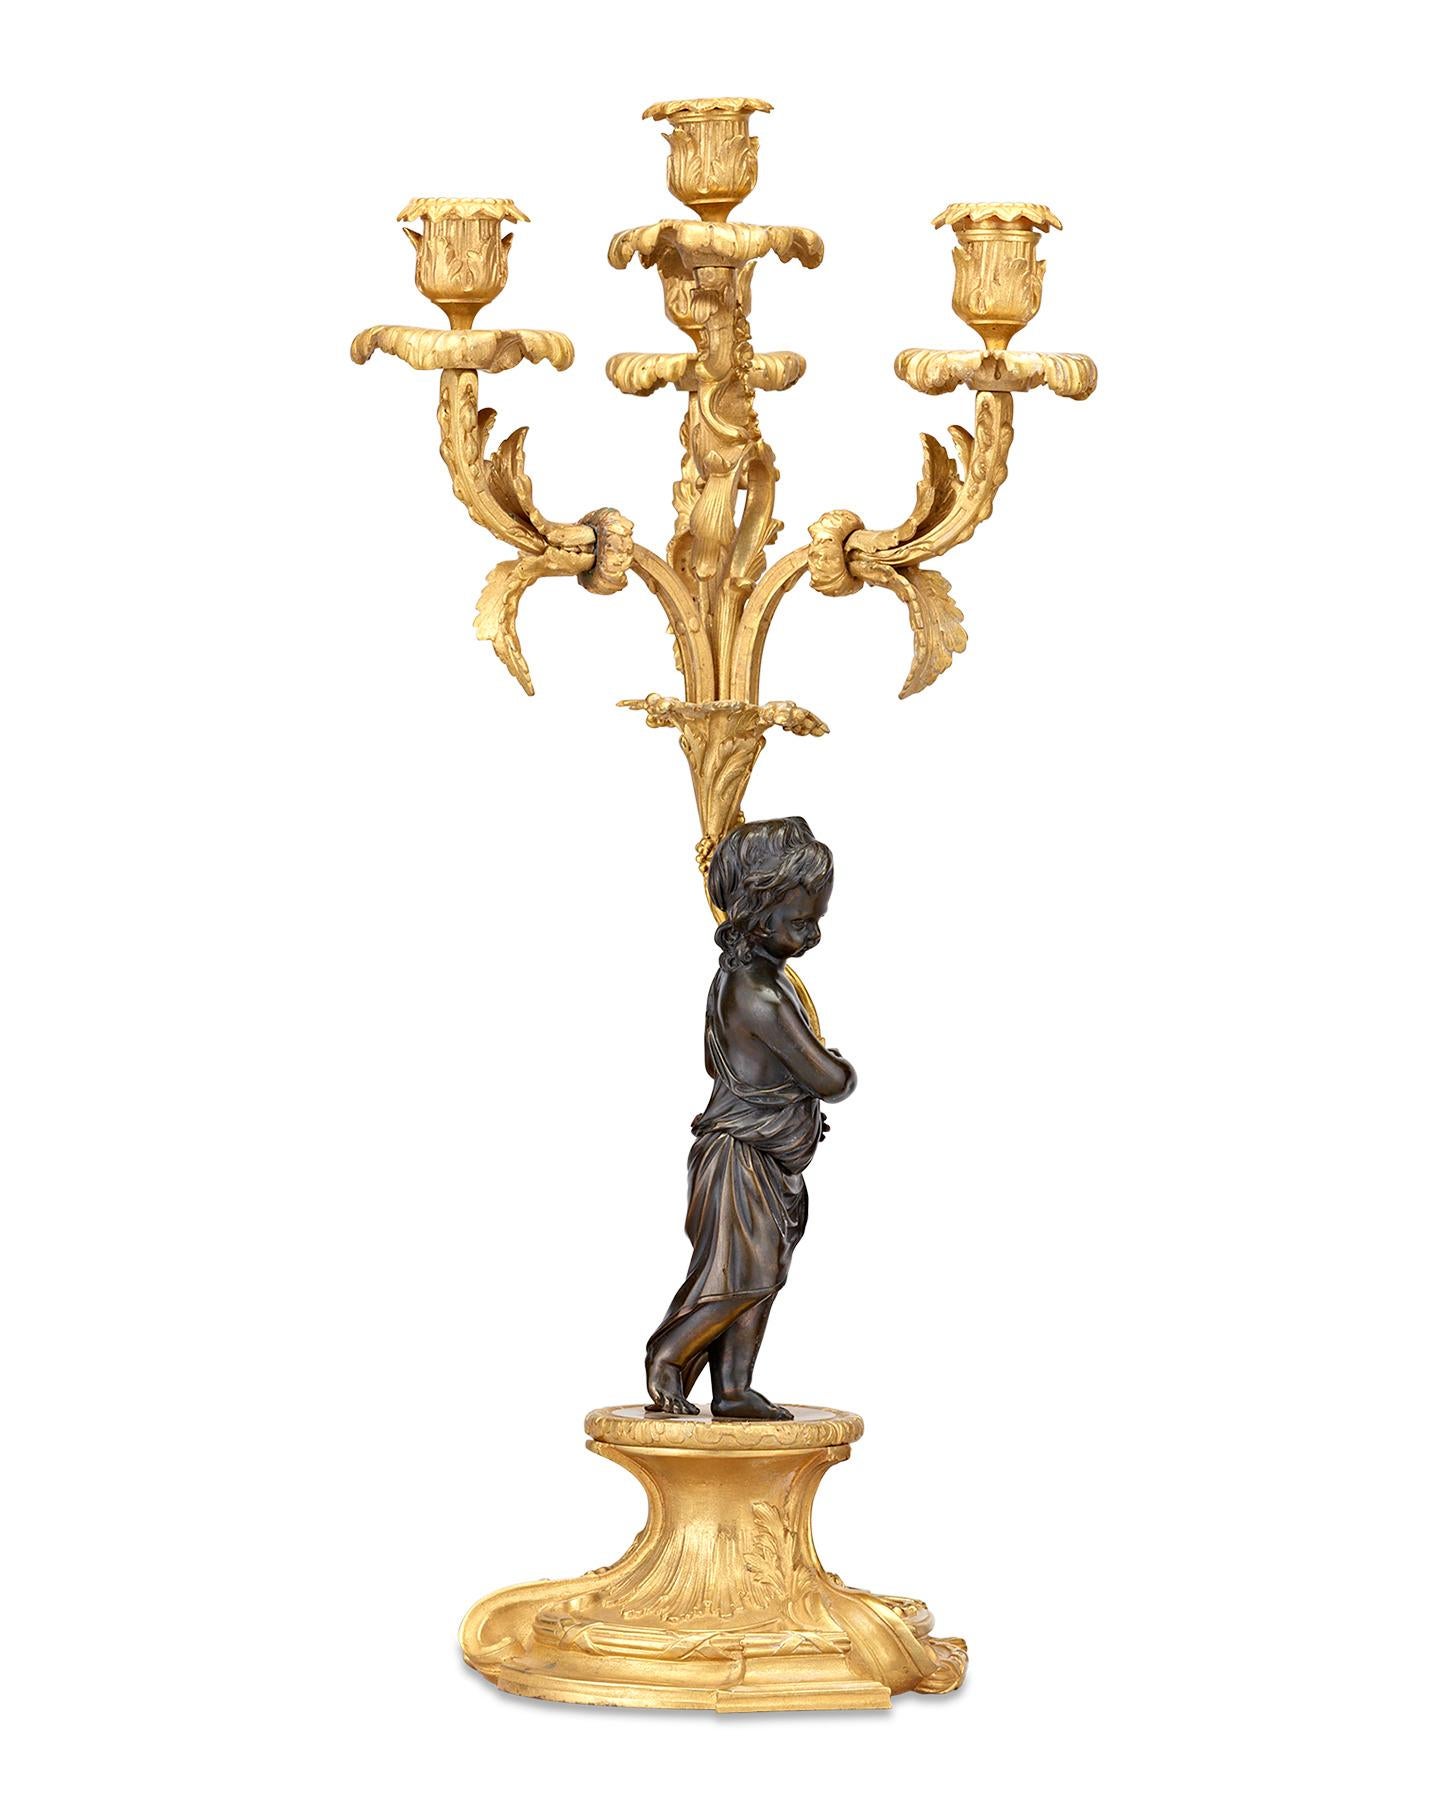 Crafted of bronze ormolu, these rare twin candelabra exhibit the beauty and grandeur of the neoclassical style. Two brushed-bronze putti figures donning classical-style togas support each candelabra, adding a charming touch exemplary of this